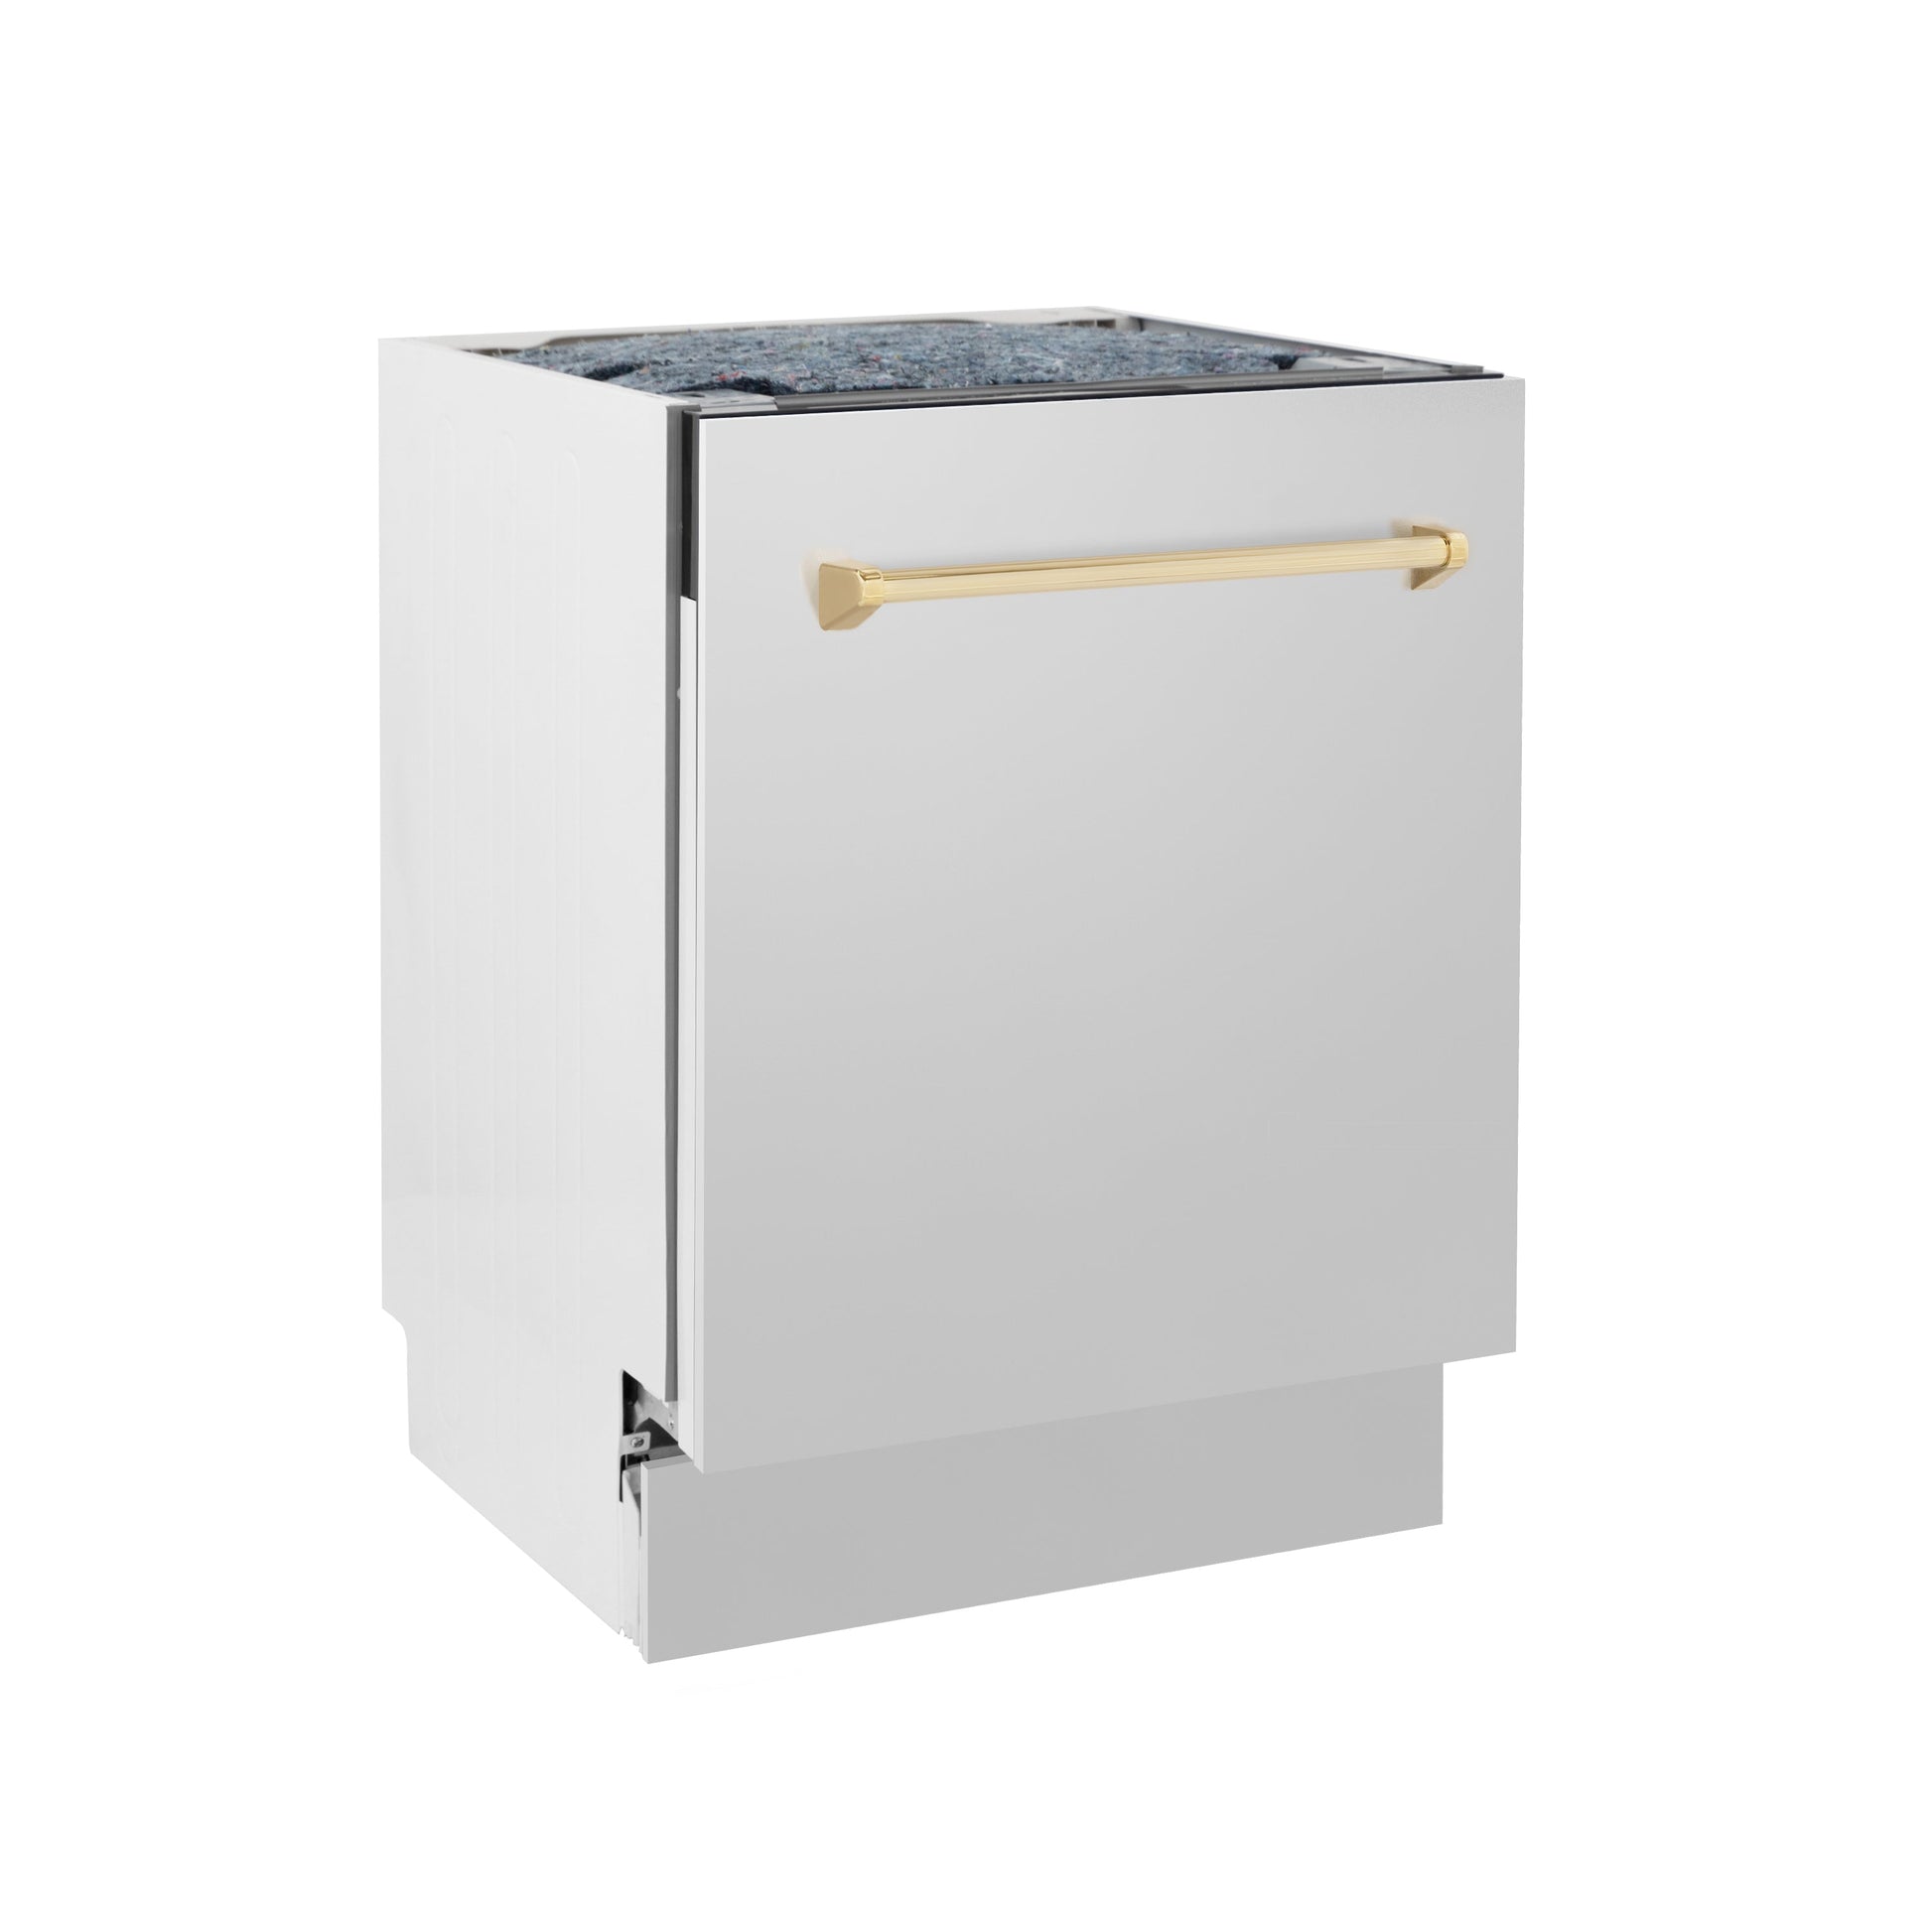 ZLINE Autograph Edition 24 in. 3rd Rack Top Control Tall Tub Dishwasher in Stainless Steel with Polished Gold Handle, 51dBa (DWVZ-304-24-G)-Dishwashers-DWVZ-304-24-G ZLINE Kitchen and Bath